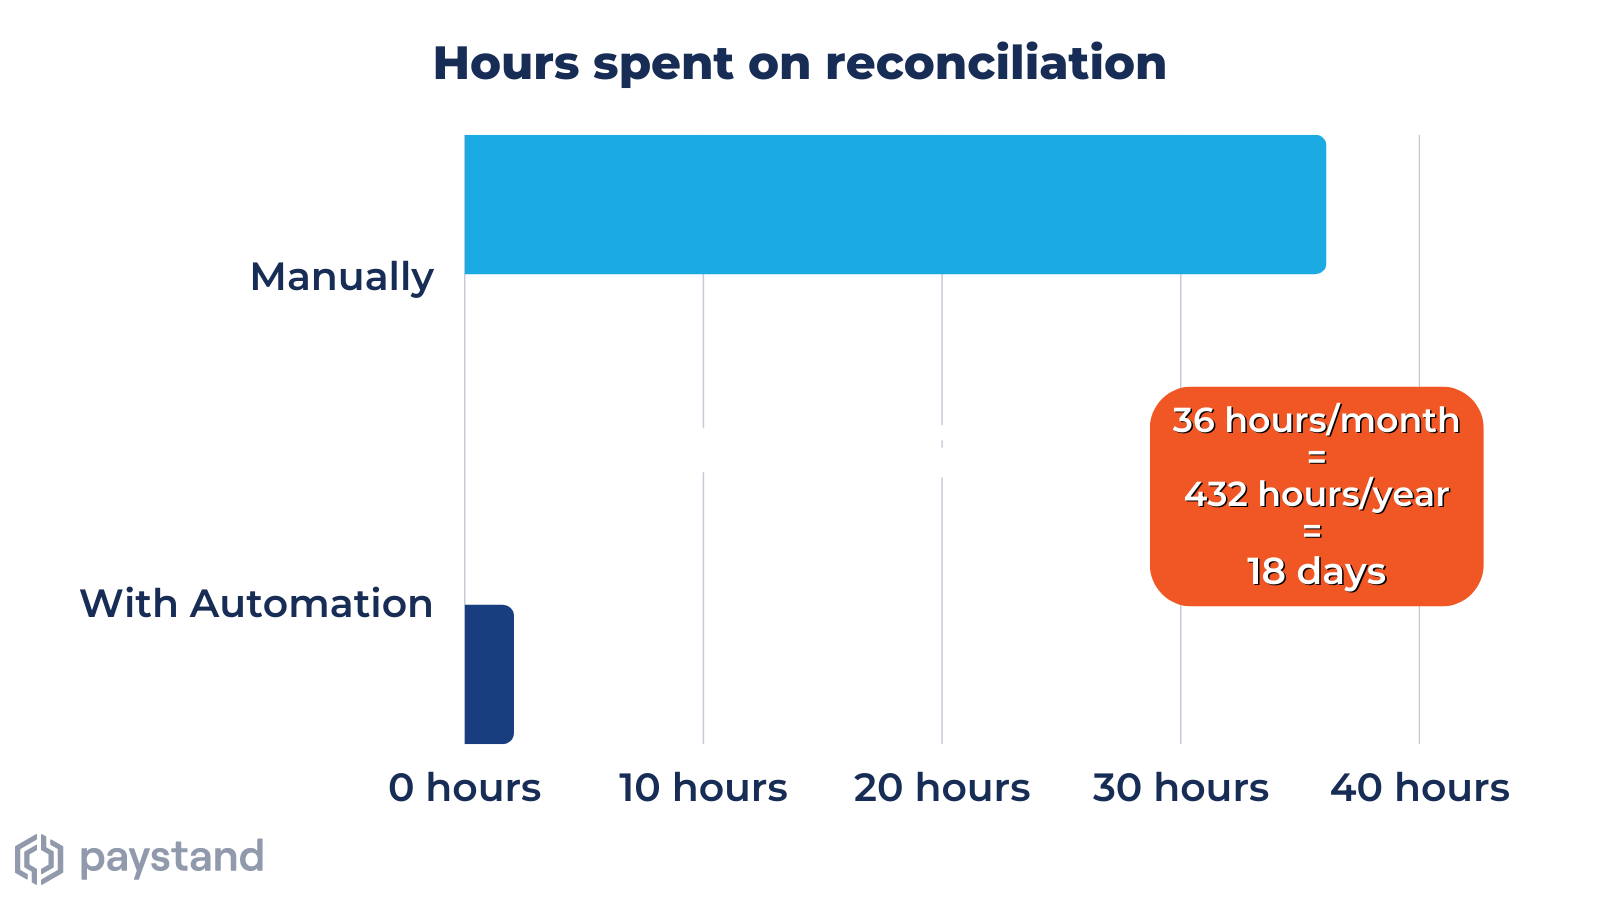 Hours spent on reconciliation